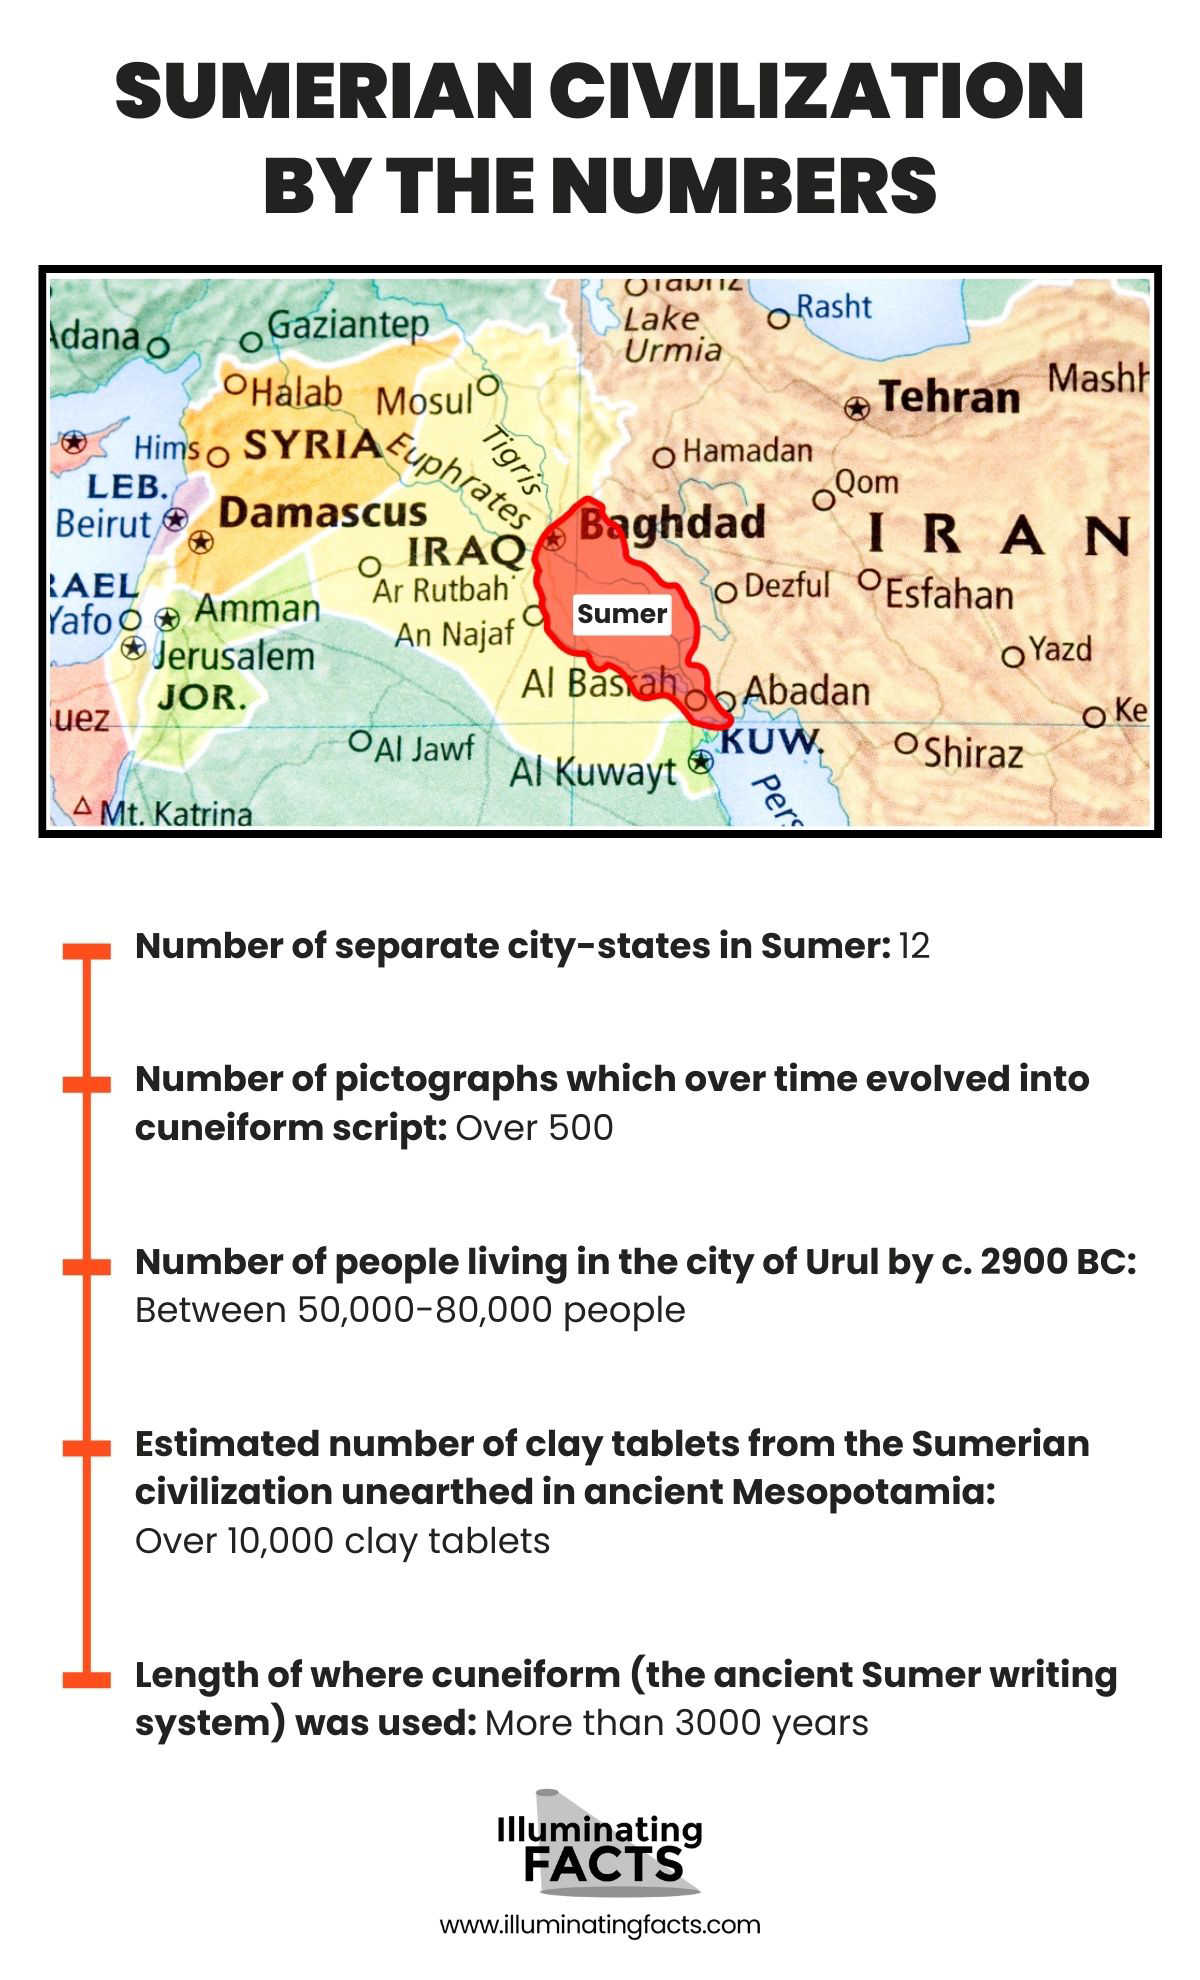 Sumerian Civilization by the Numbers